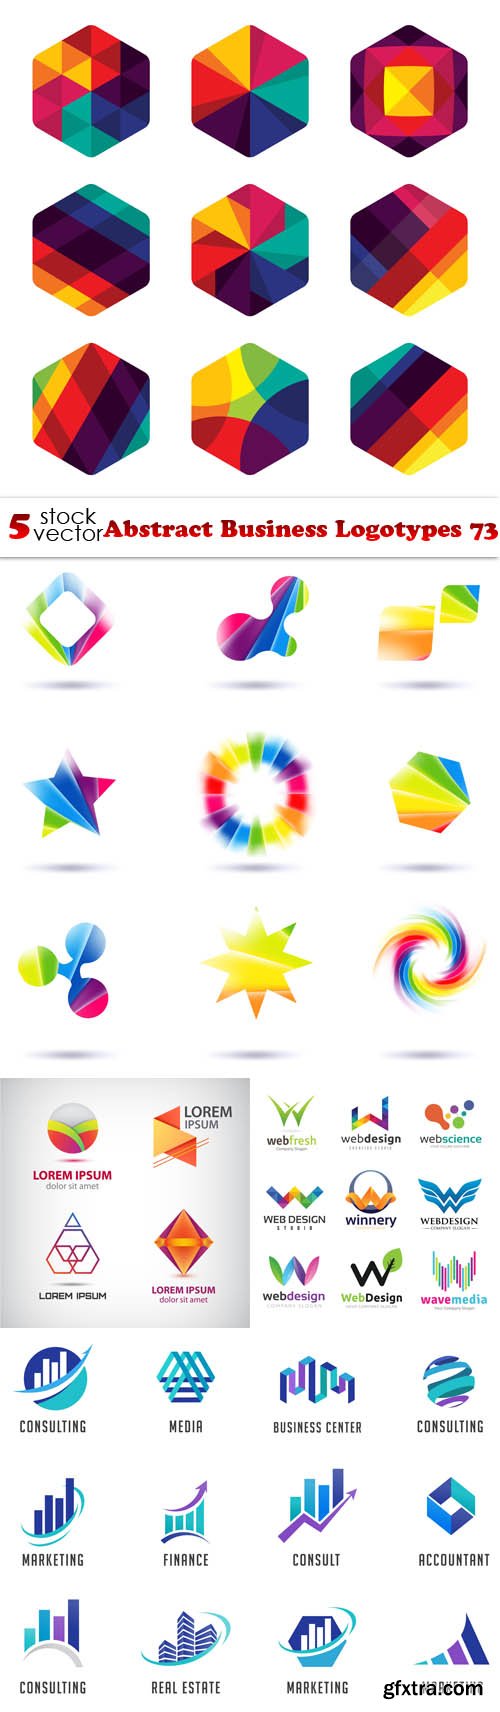 Vectors - Abstract Business Logotypes 73